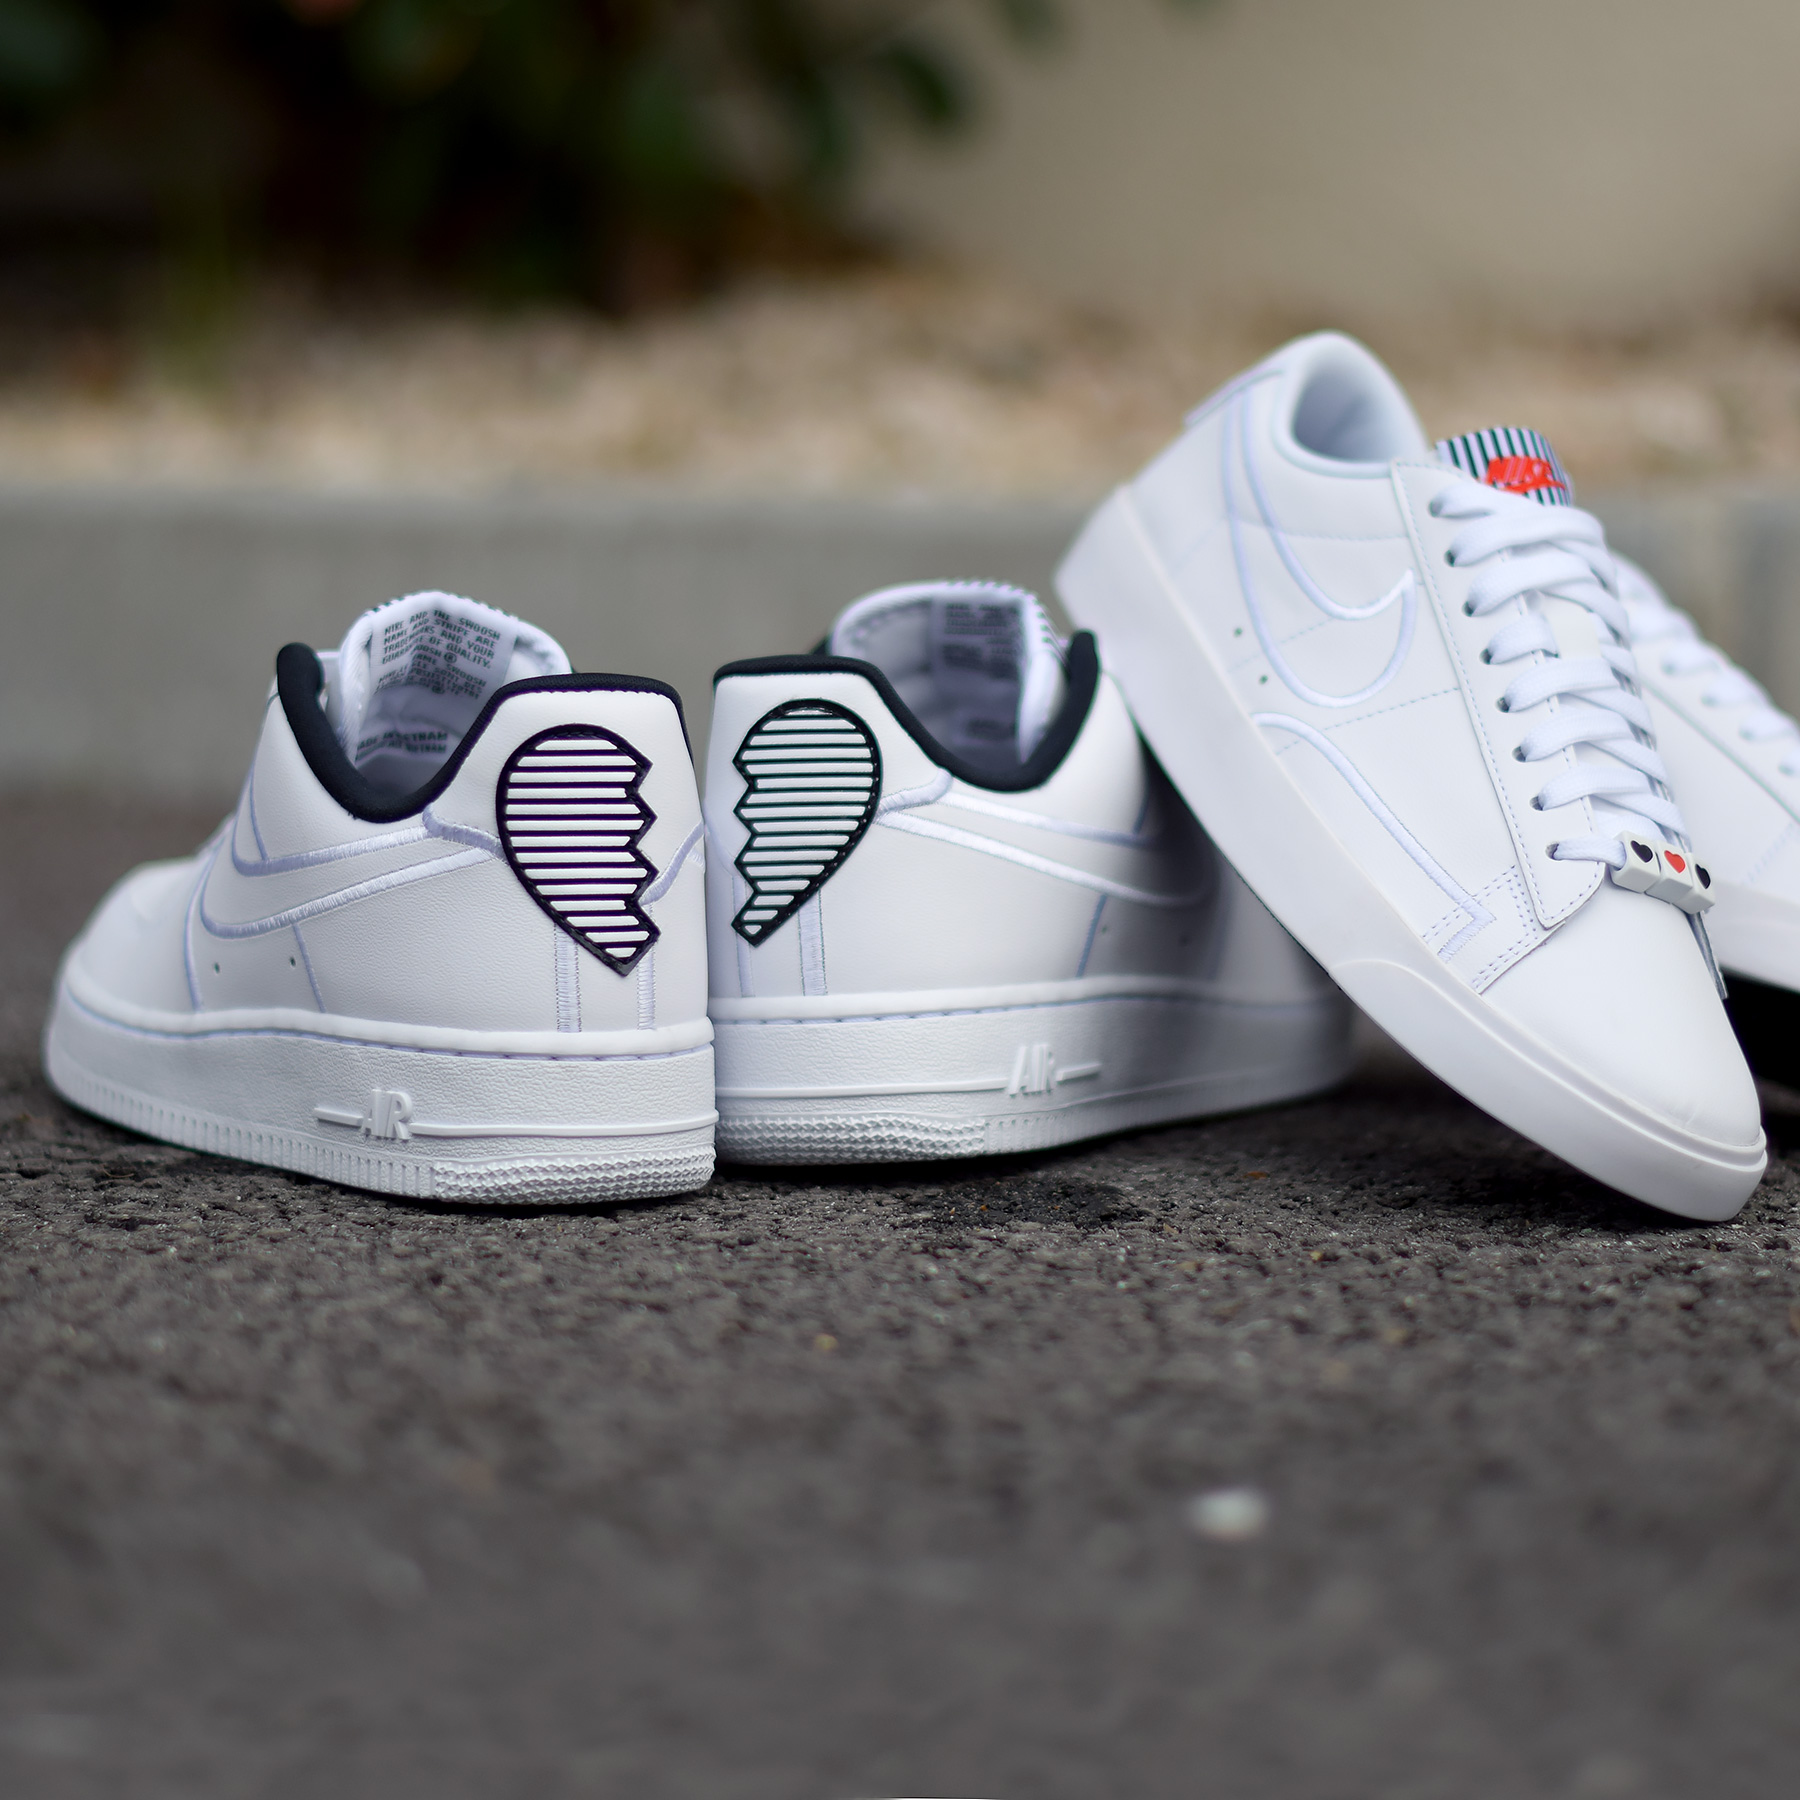 Nike air force low valentine s day. Nike Air Force Heart. Nike Air Force 1 Heart. Nike Air Force 1 Low Wmns “Valentines Day”. Nike Air Force 1 Low Valentine.